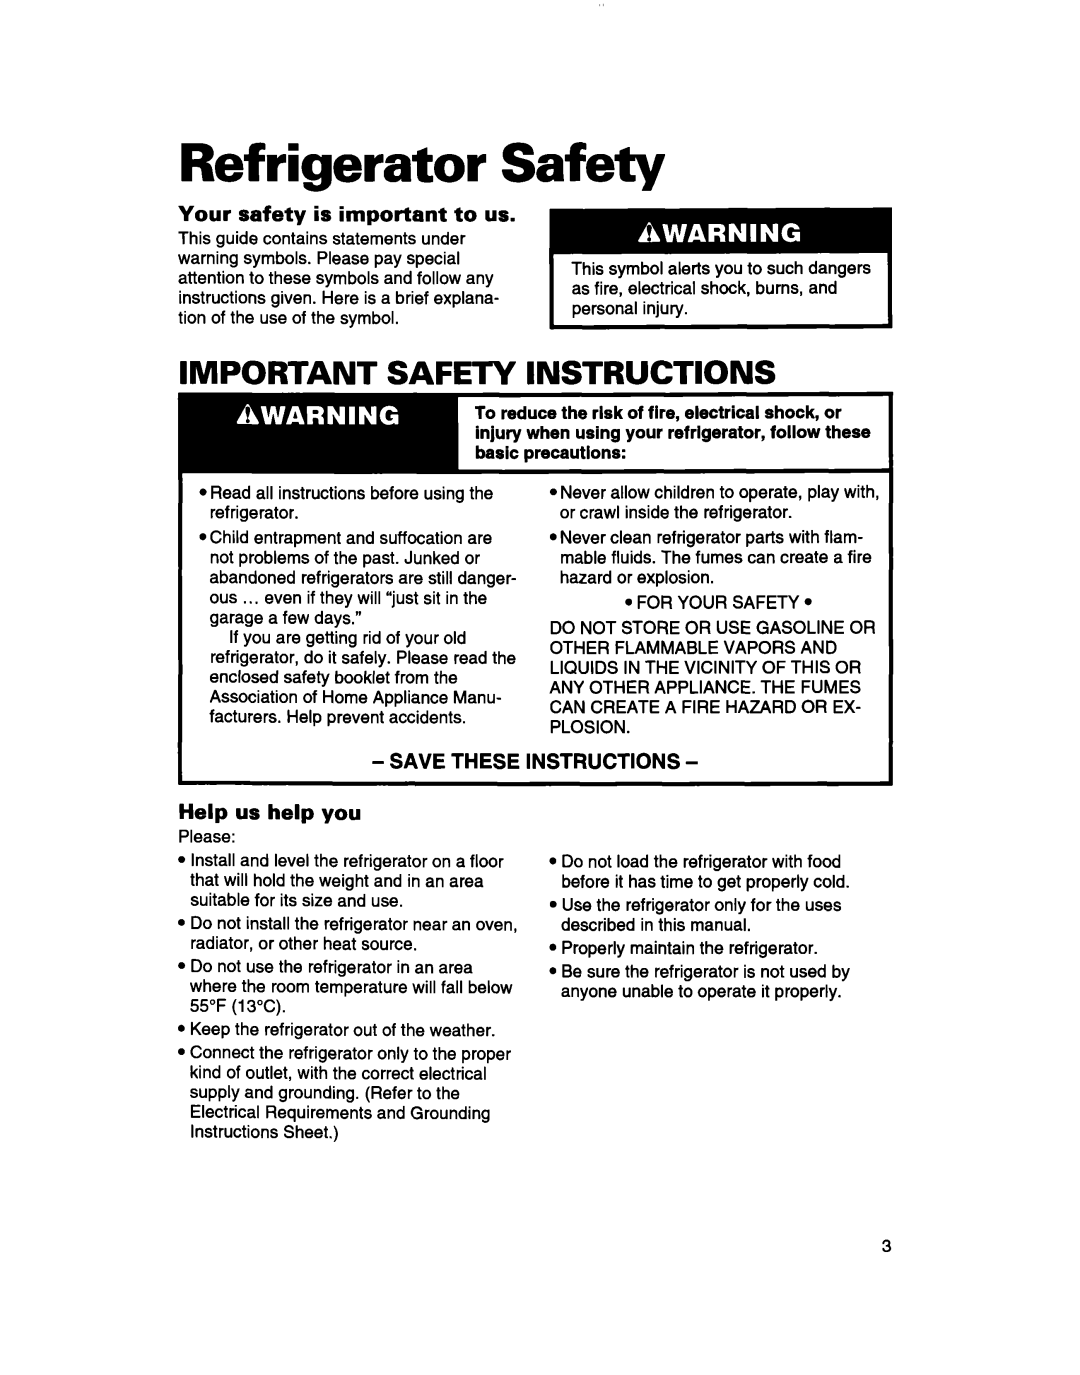 Whirlpool 2183013 Refrigerator Safety, Important Safety Instructions, Your safety is important to us, Help us help you 